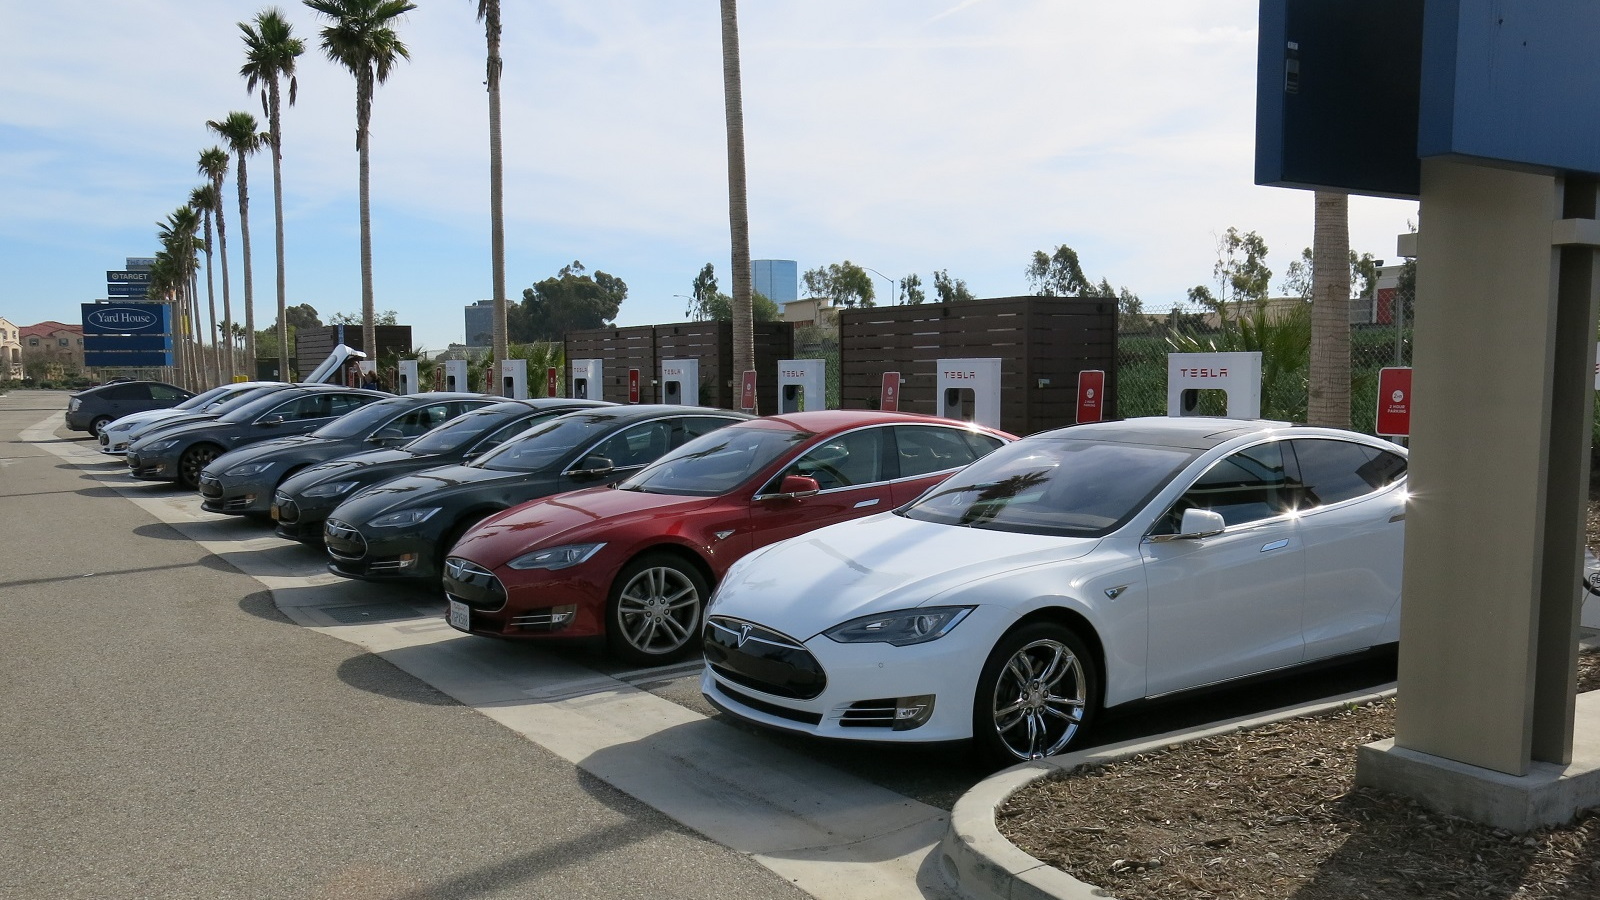 Tesla Model S at Supercharger site in Ventura, CA, with just one slot open  [photo: David Noland]